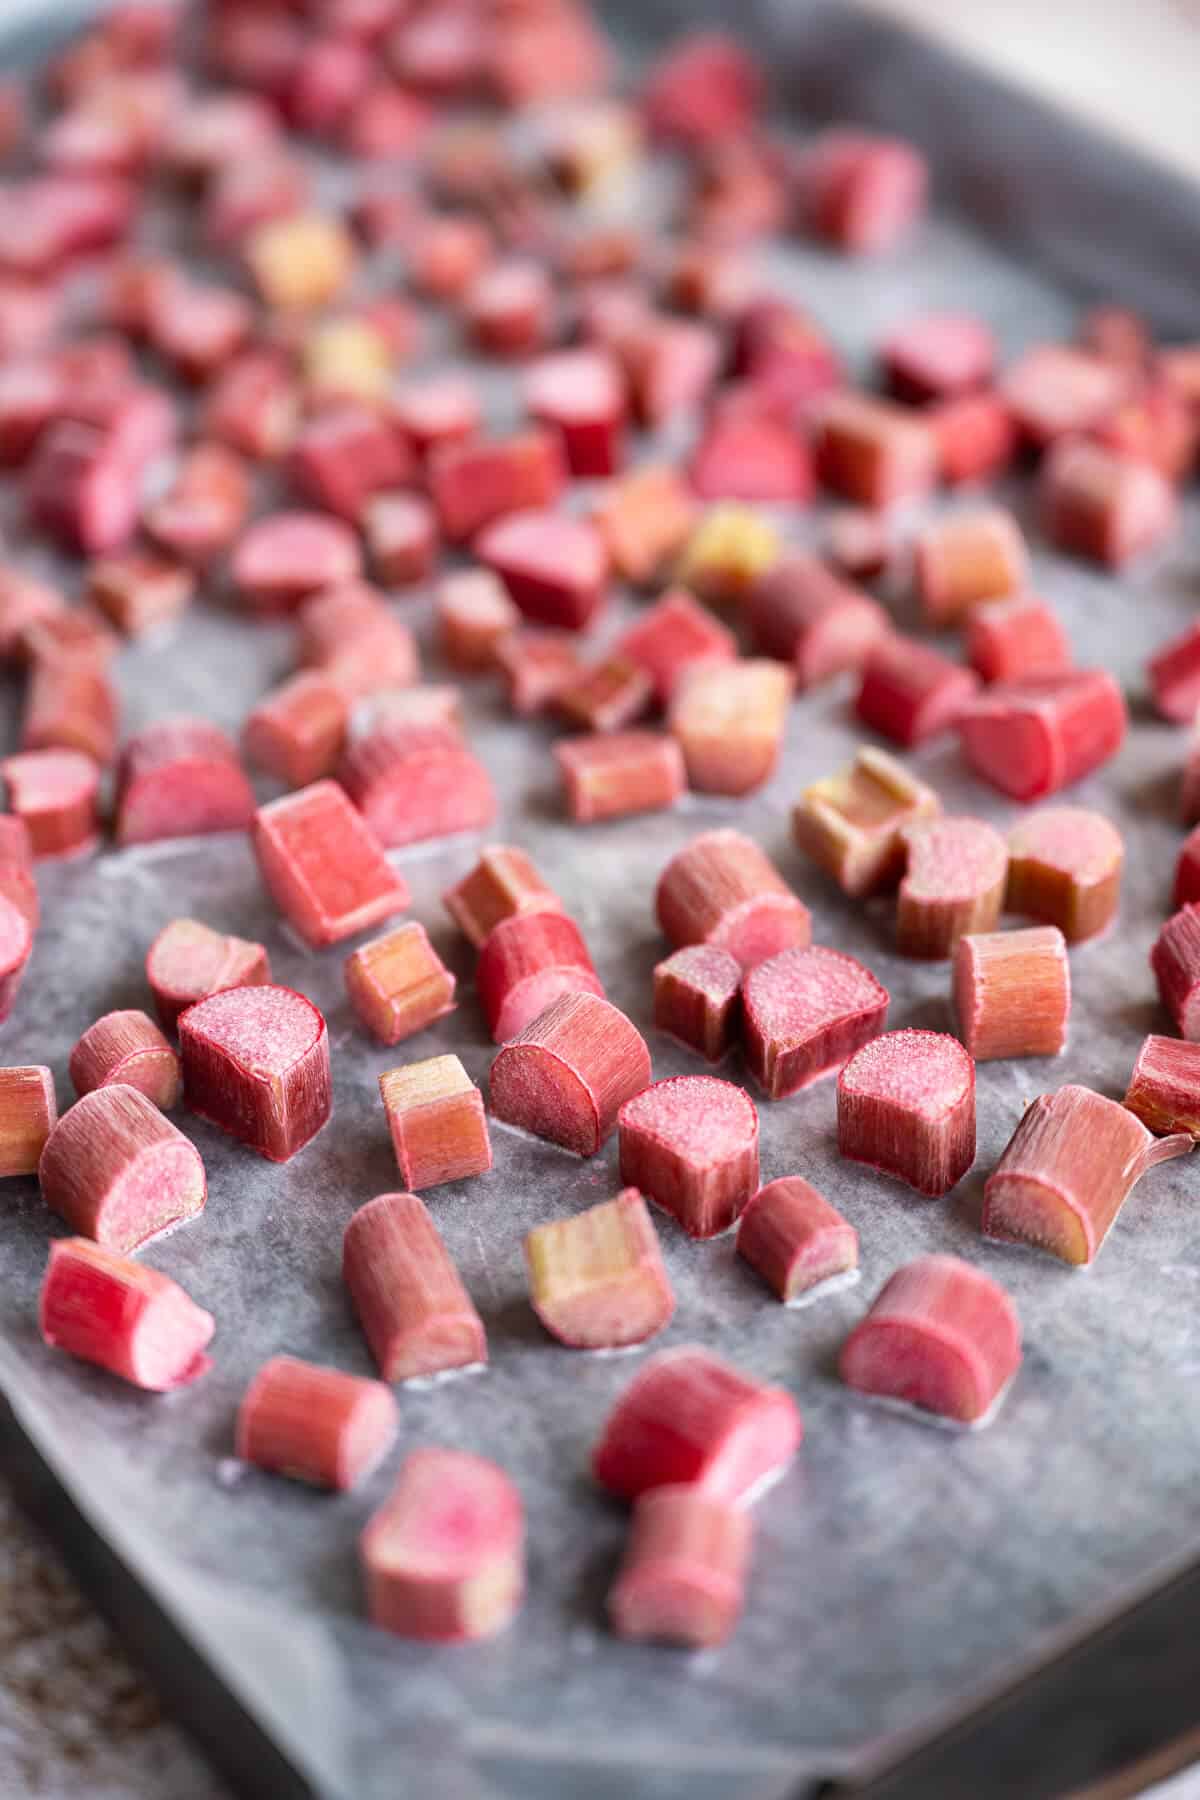 Frozen chunks of rhubarb on a wax paper lined rimmed baking sheet. Closer pieces are in focus, further pieces are out of focus.